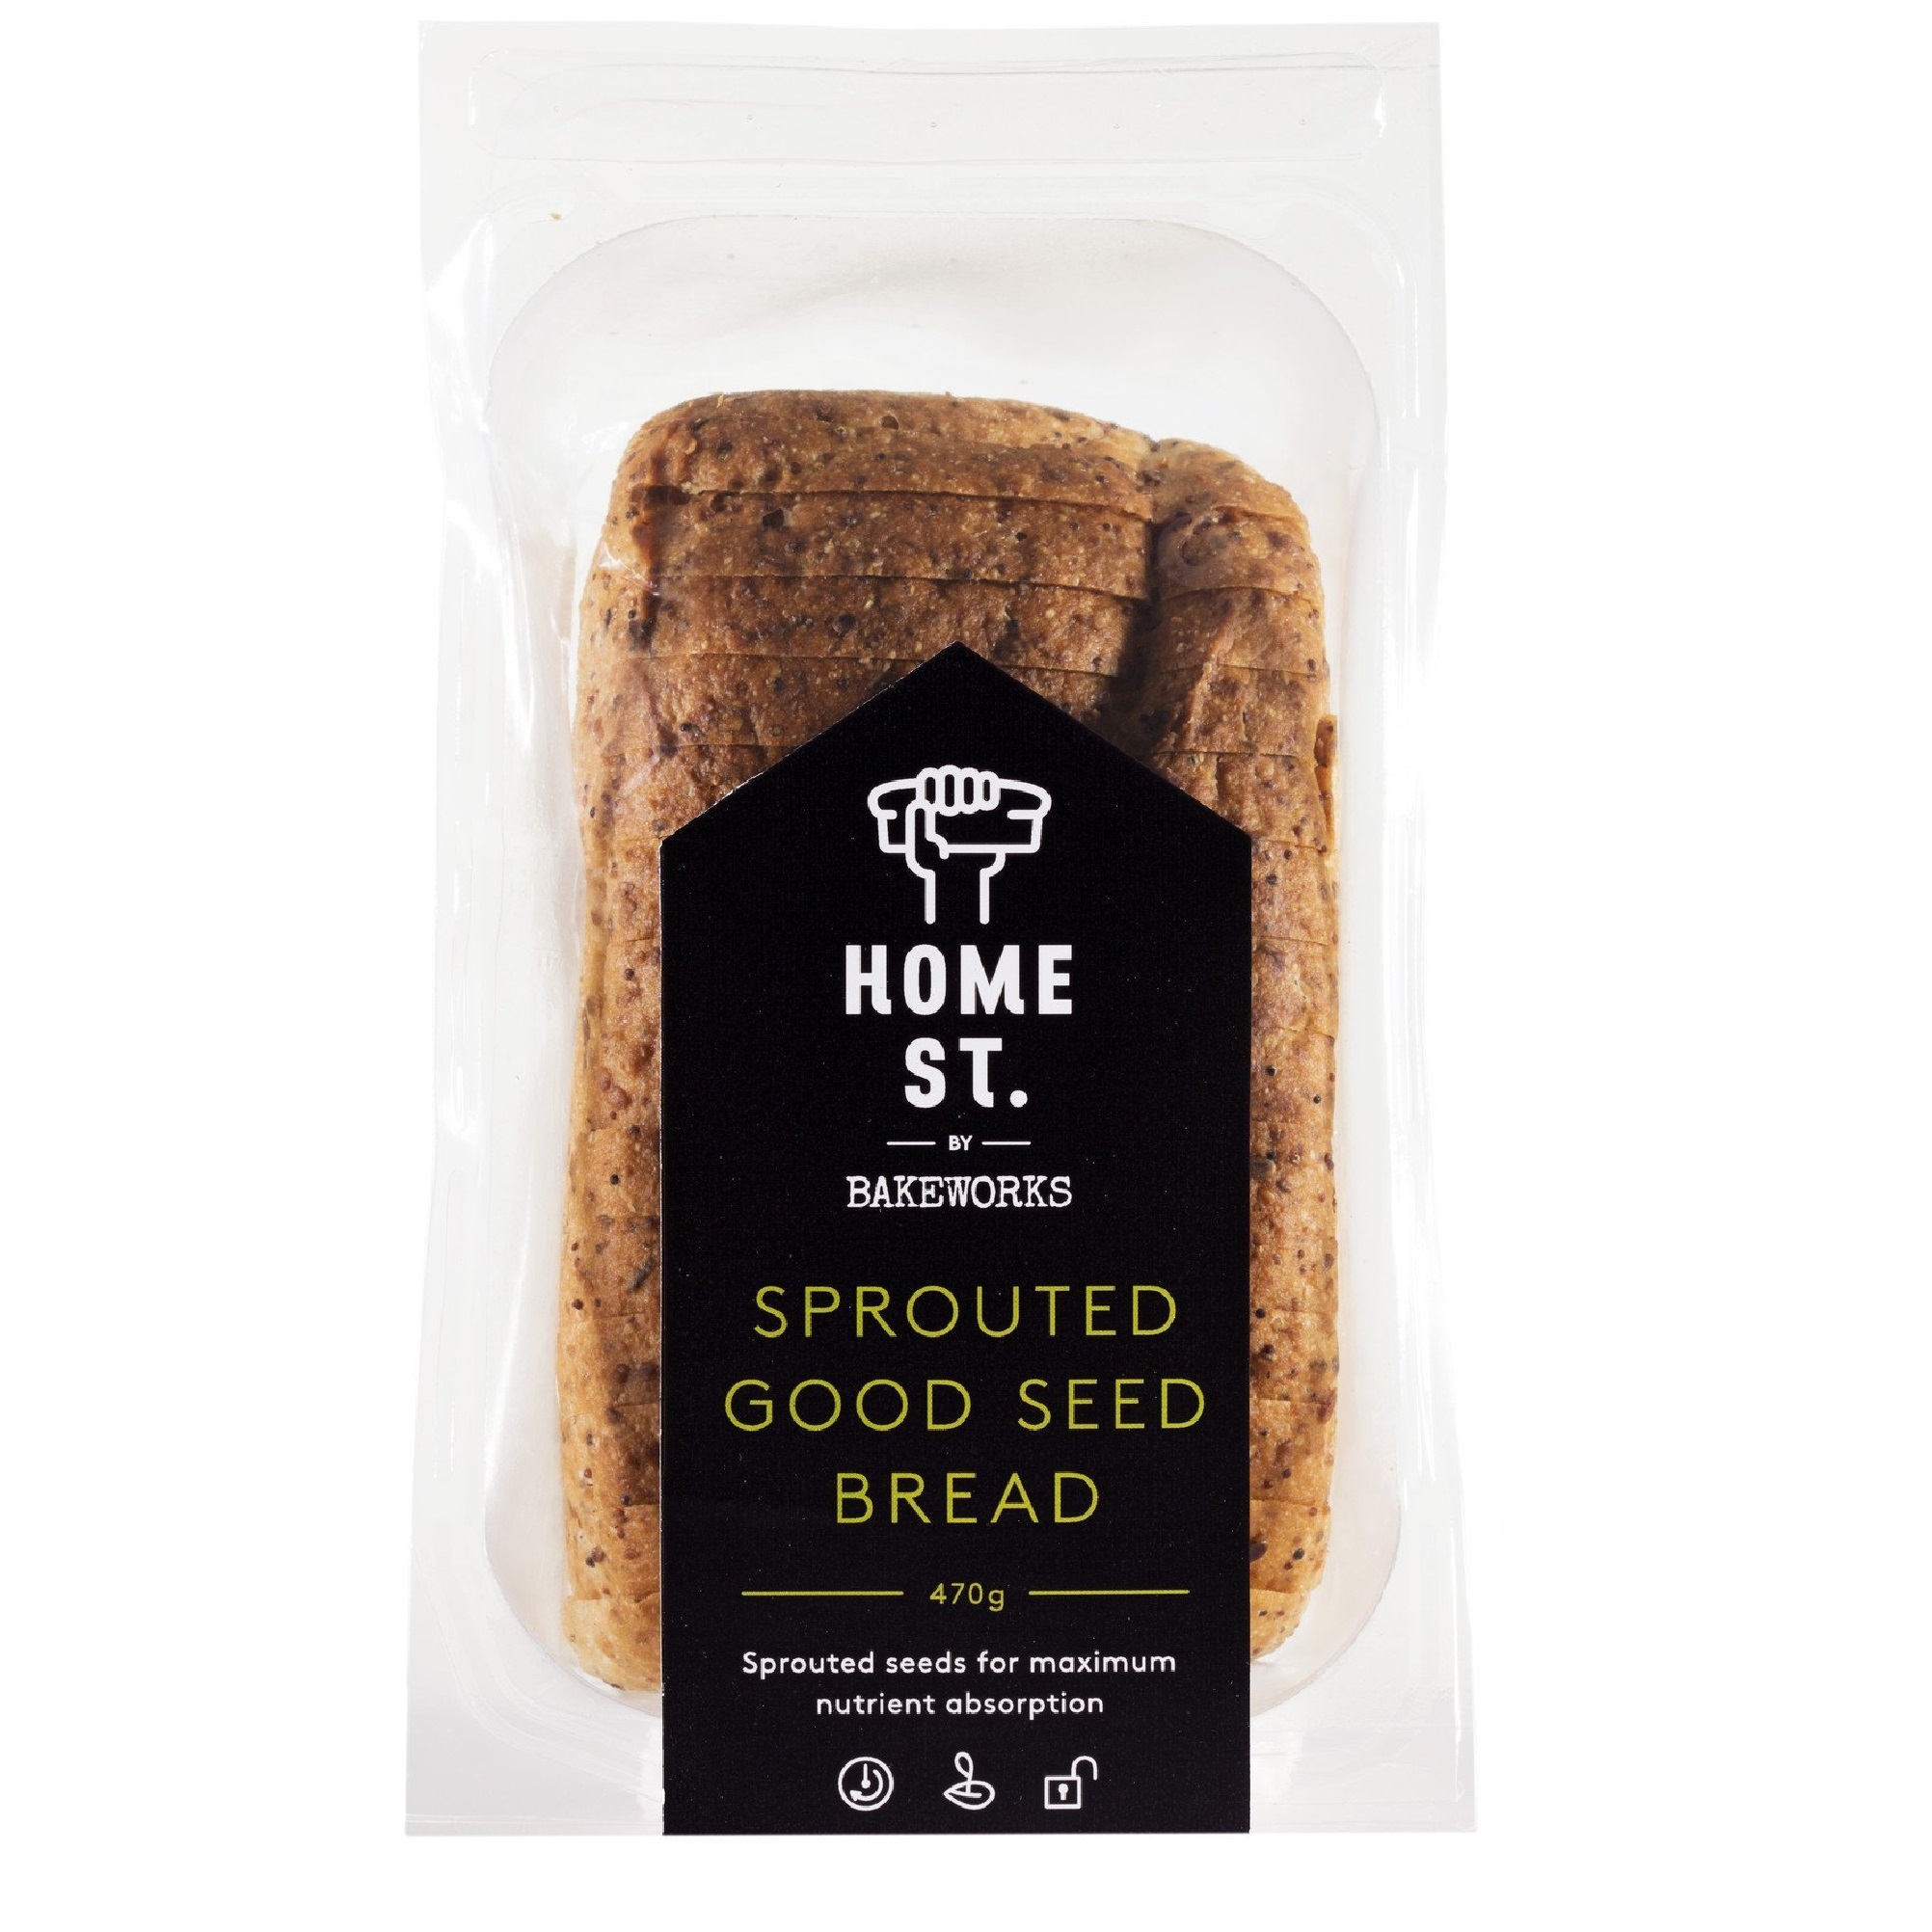 Frozen Home St. Sprouted GF Good Seed Bread 470g - NZ*